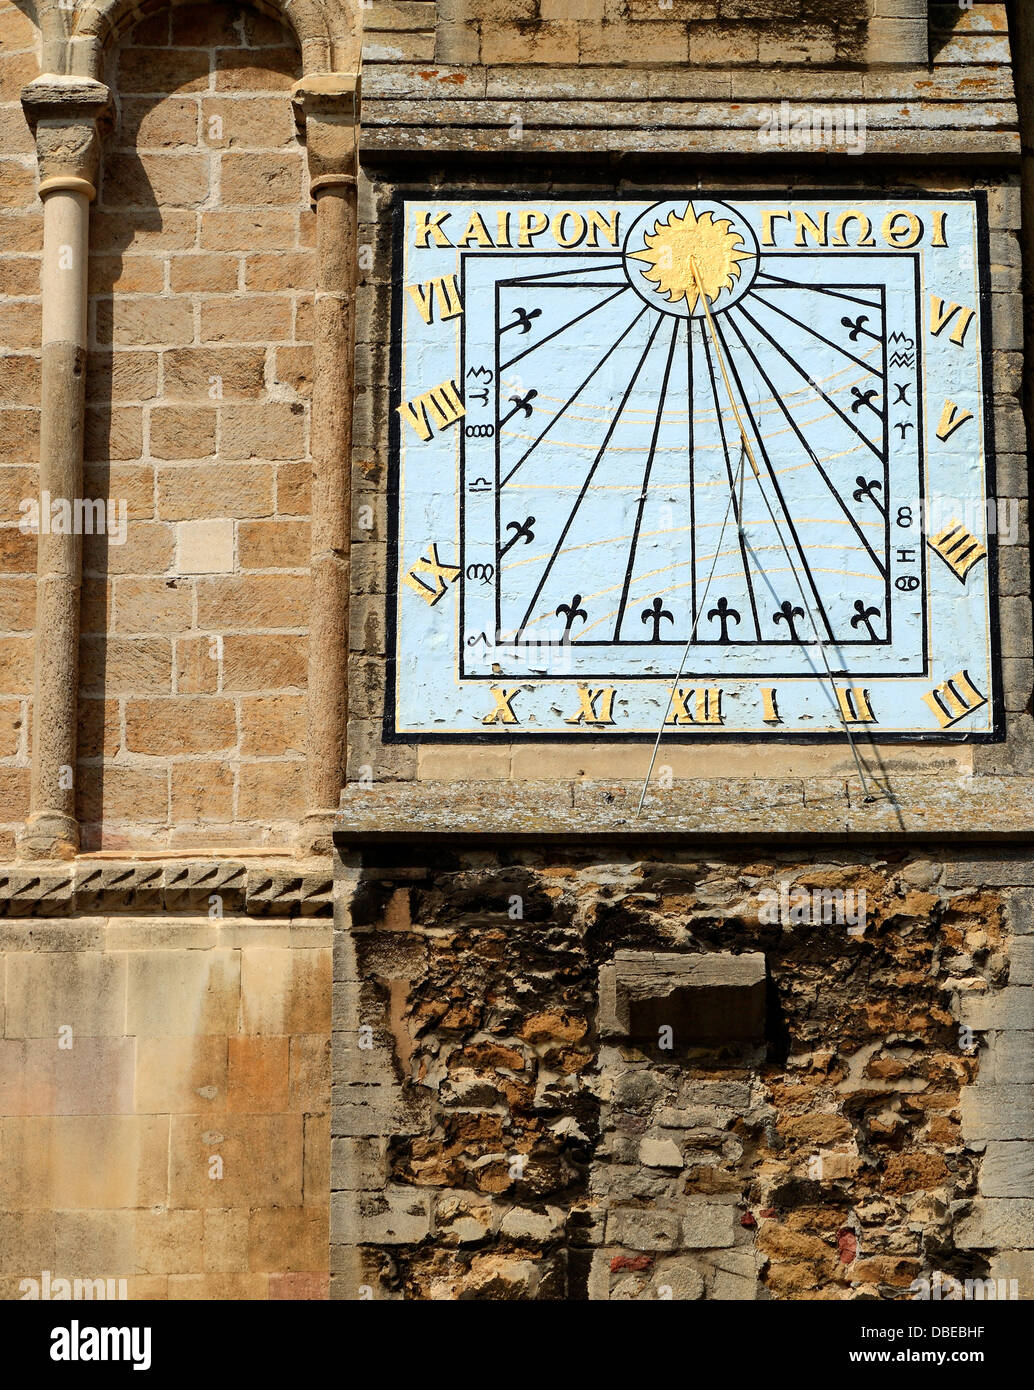 Ely Cathedral, Sundial on South Transept wall, Greek inscription 'Know the Time', Cambridgeshire England UK sundials Stock Photo